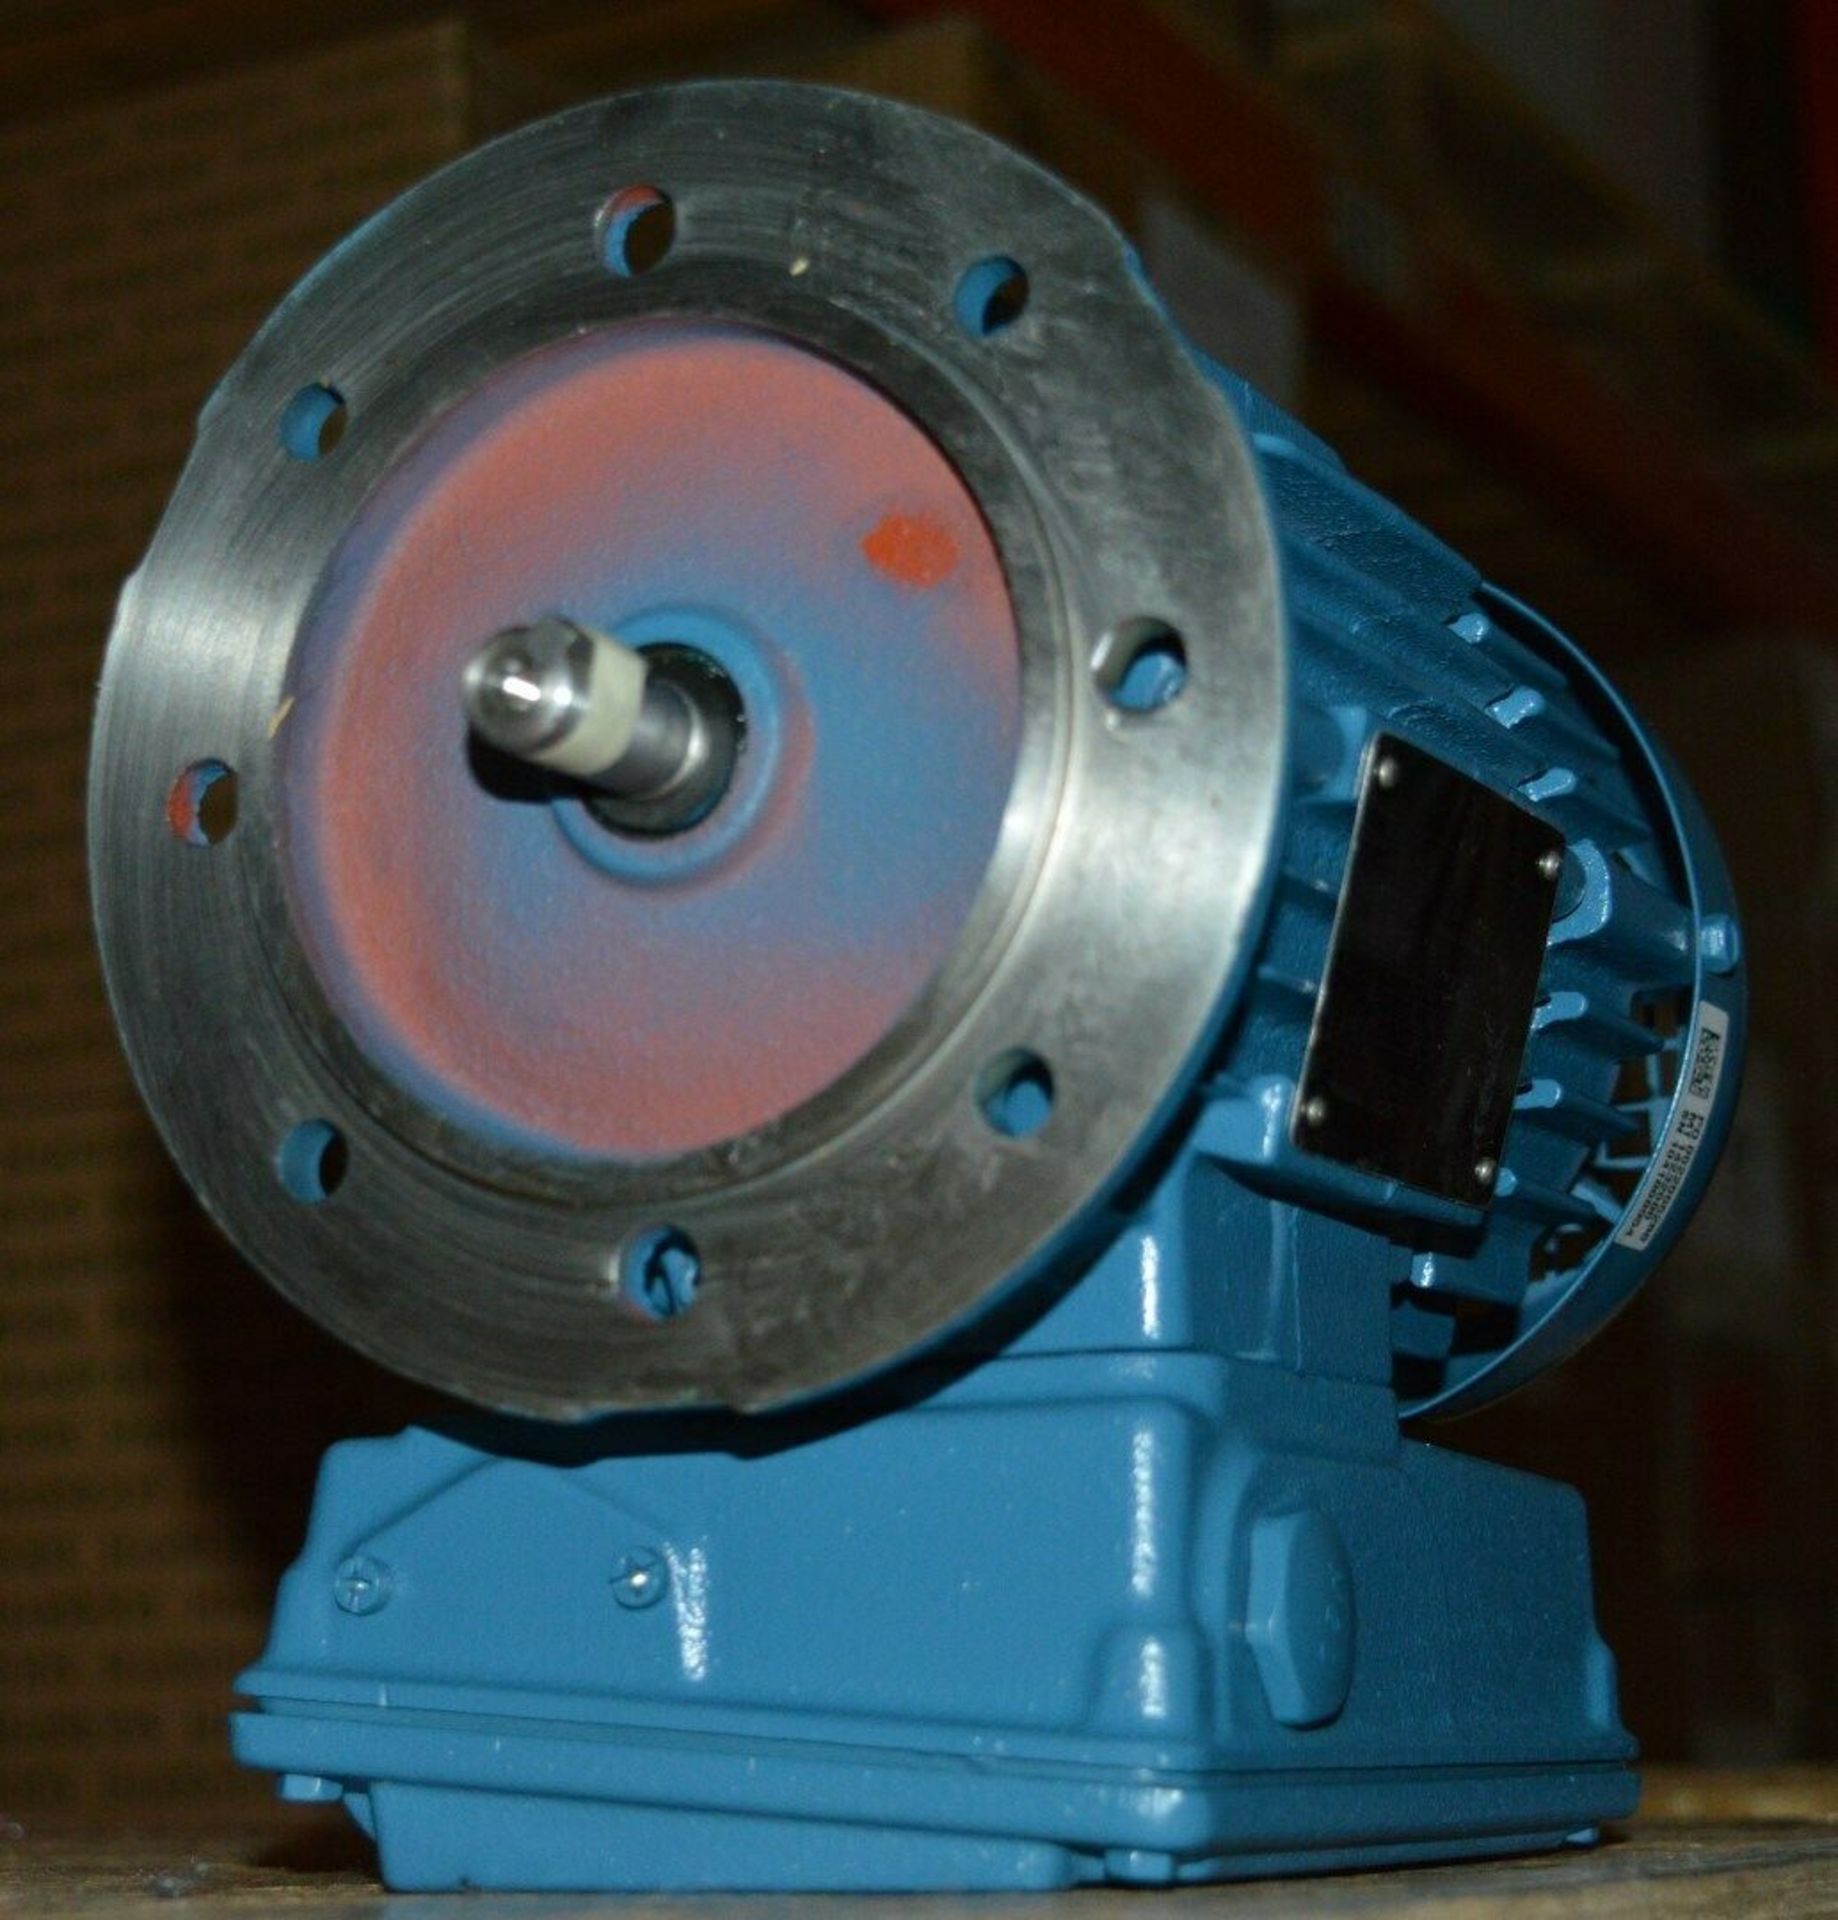 1 x Weg W22 110v IP55 Single Phase Electric Motor - Brand New and Boxed - CL295 - Location: - Image 5 of 7